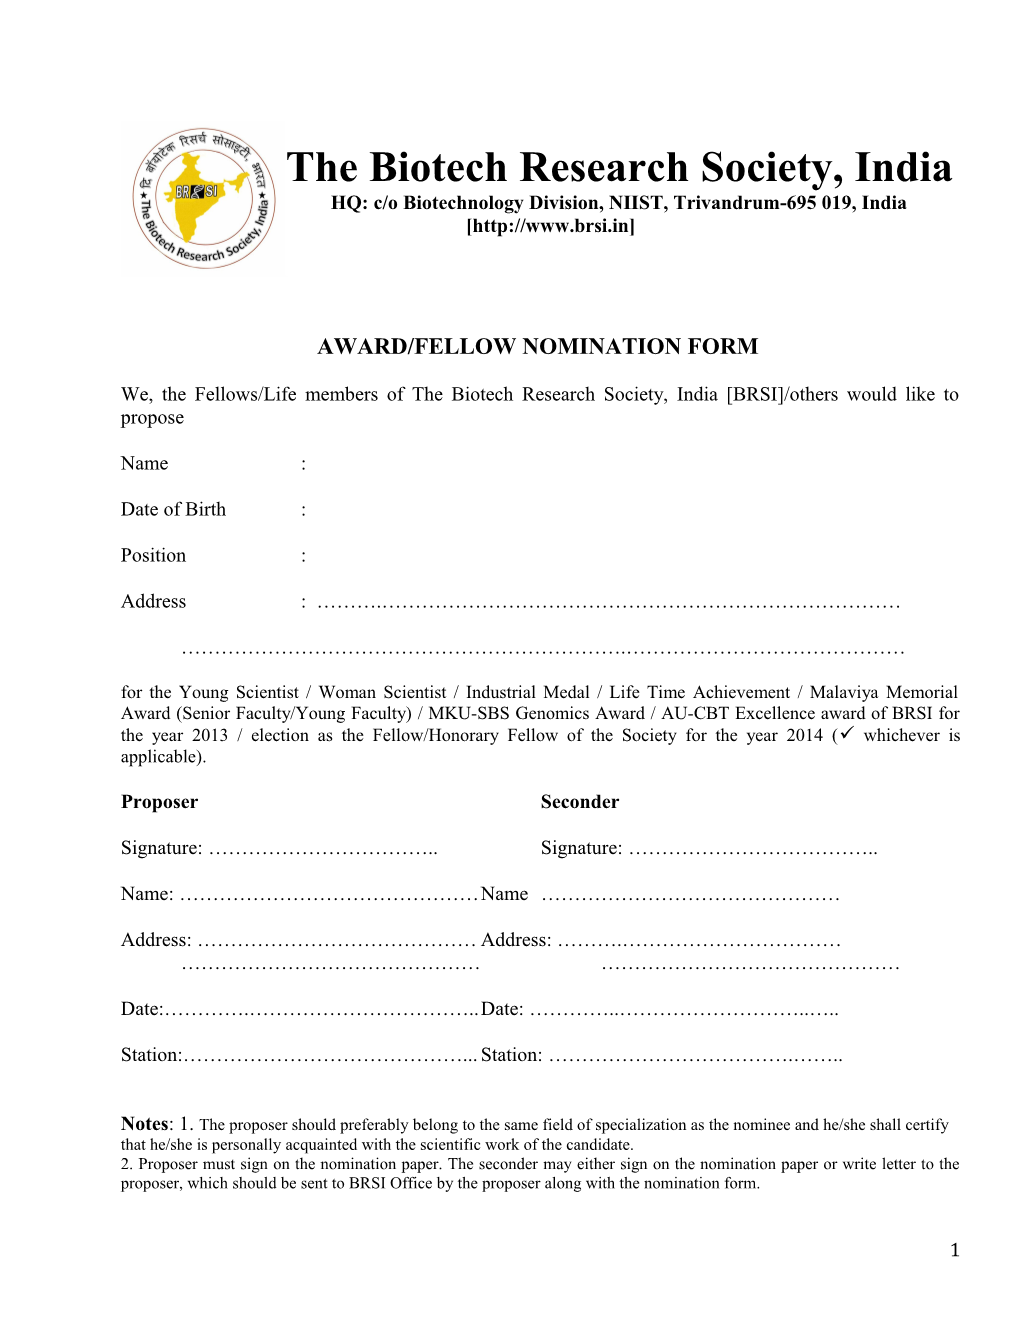 The Biotech Research Society